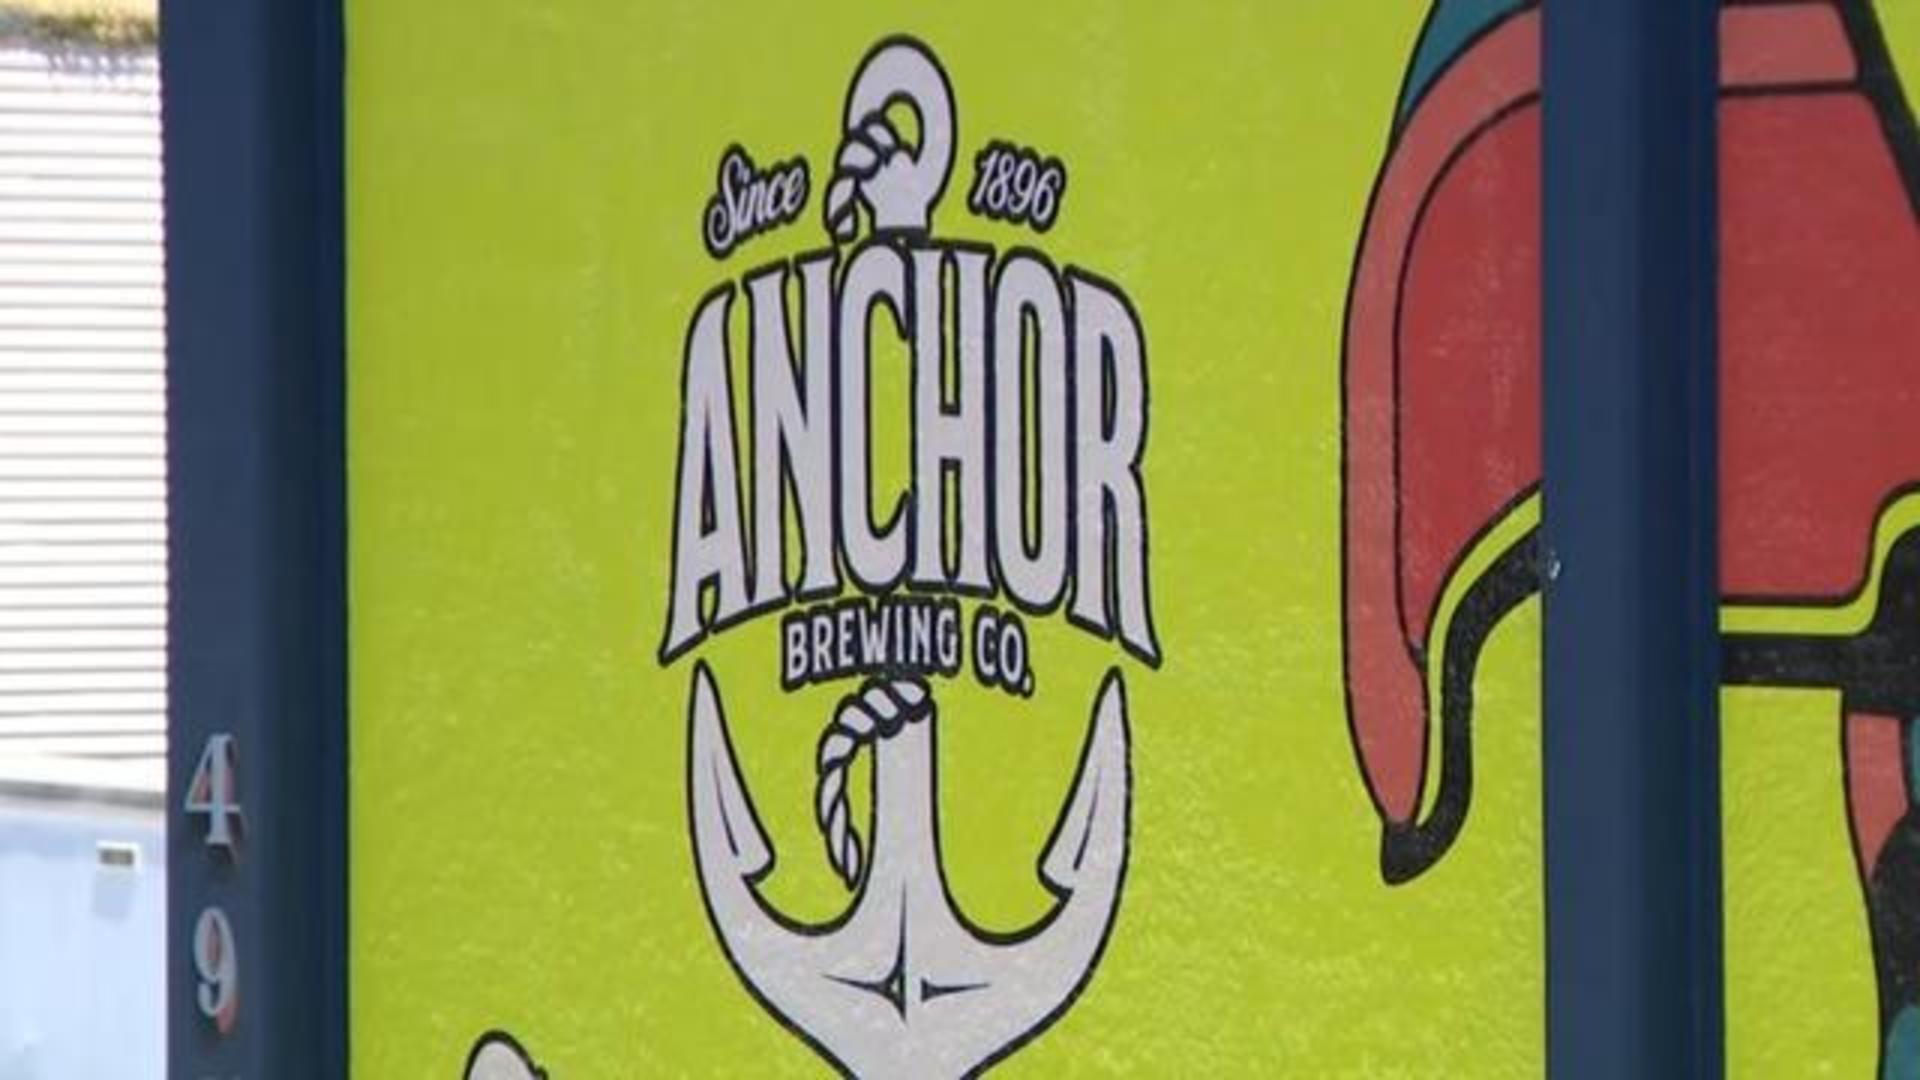 Oldest U.S. craft brewery shutting down after 127 years - CBS News